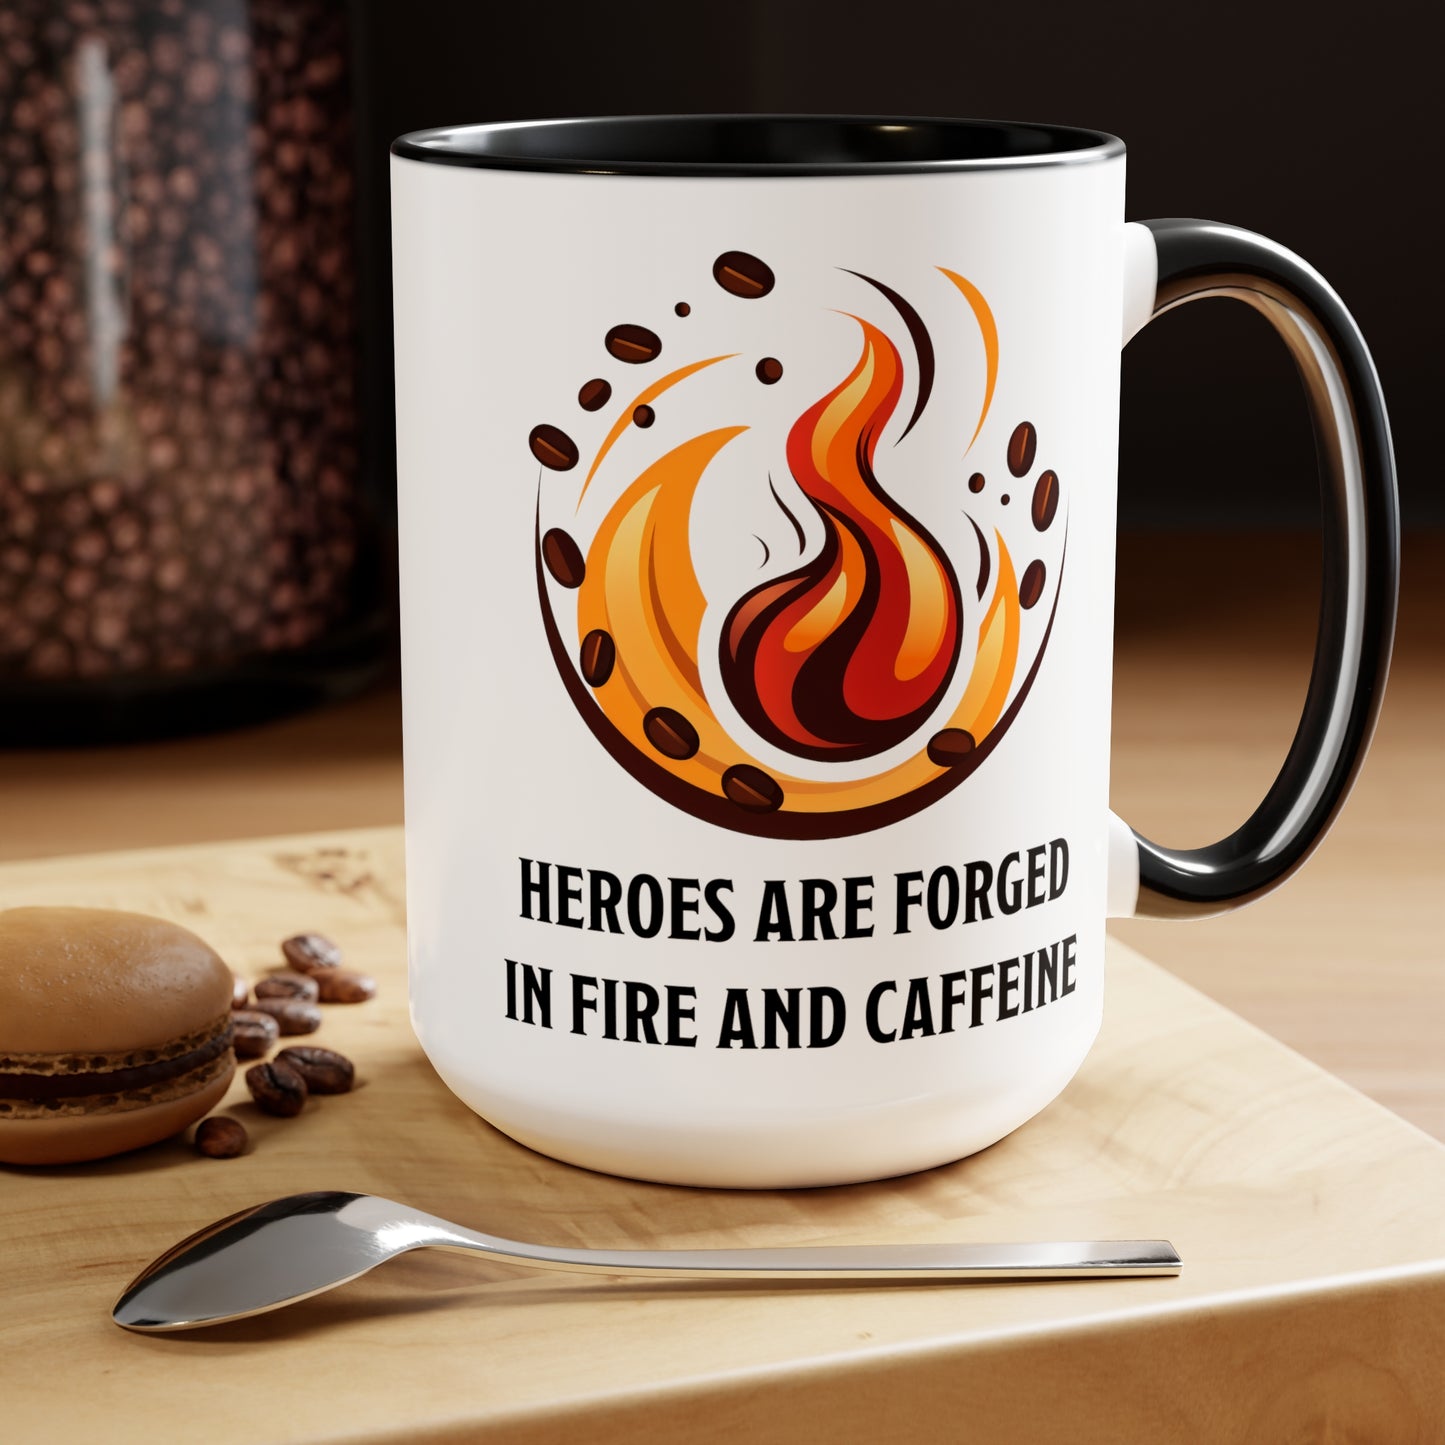 Heroes are Forged in Fire and Caffeine Ceramic Mug 15oz, DnD Mug, Dungeon Master Gift, Two-Tone Coffee Mugs